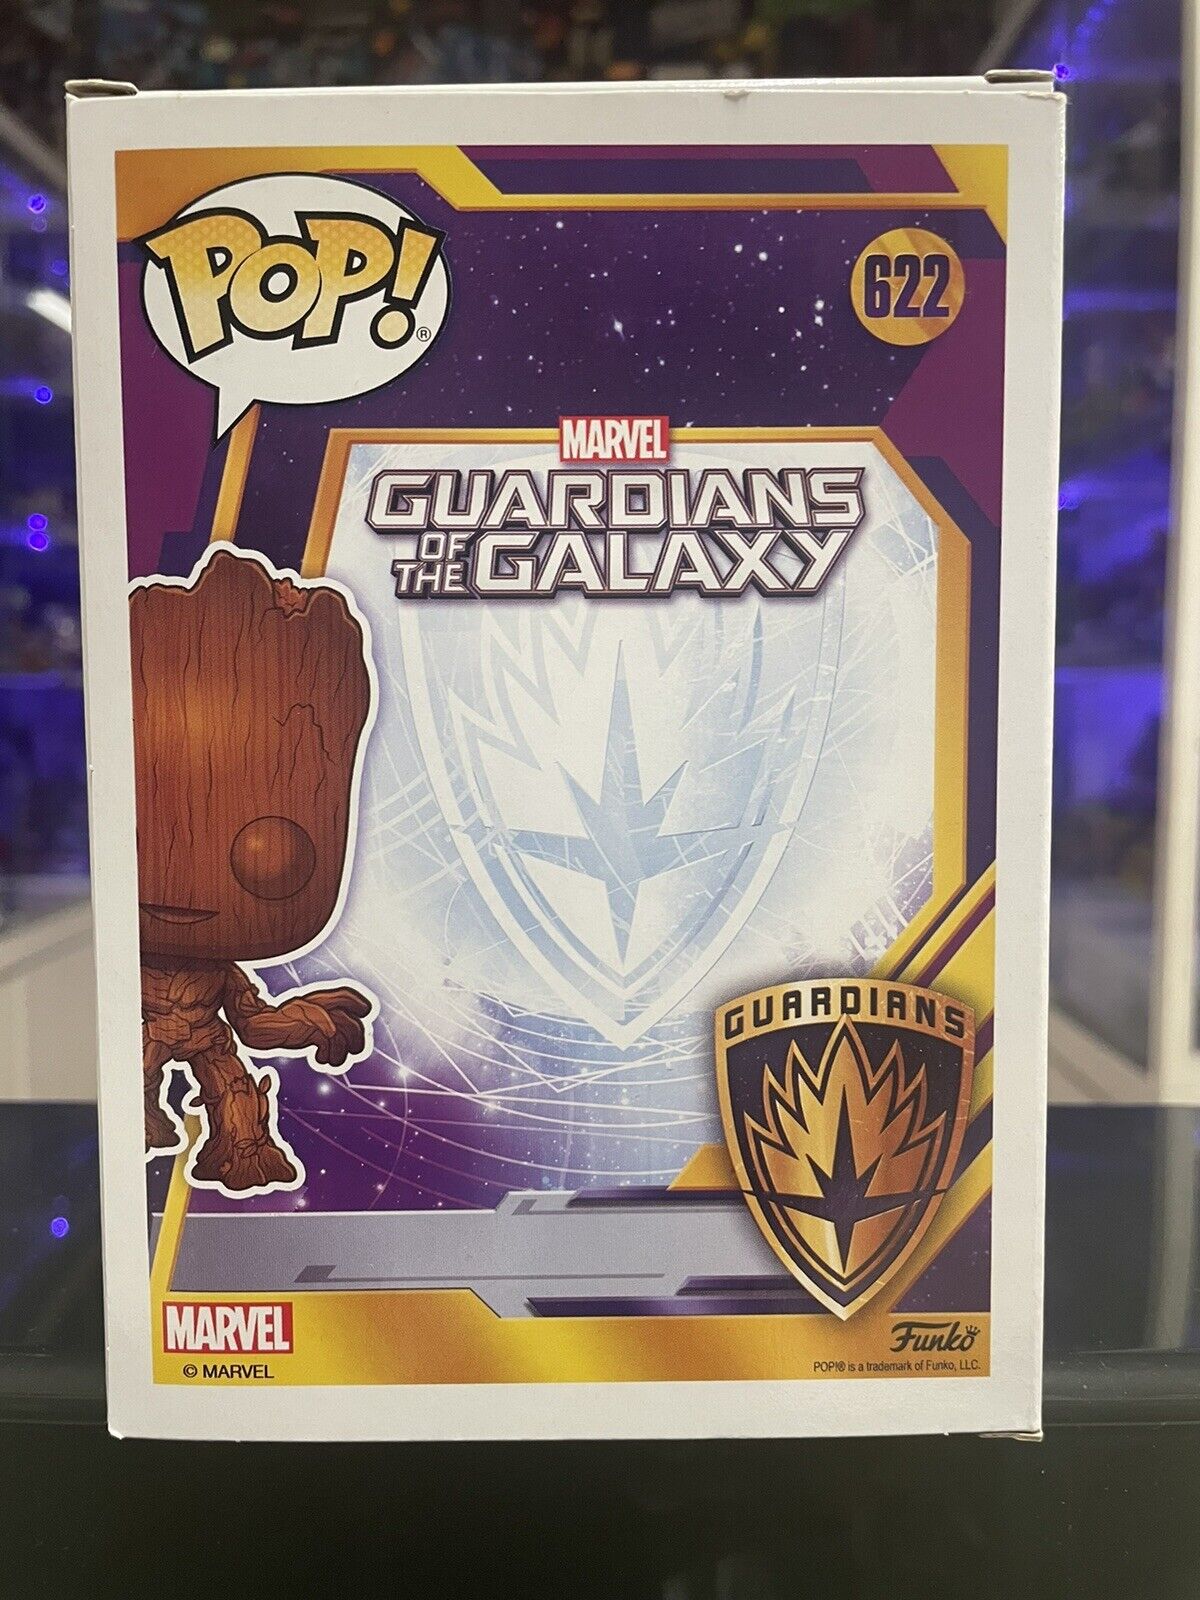 Funko-Pop-Guardians-of-the-Galaxy-622-Groot-Special-Edition-144844572309-2